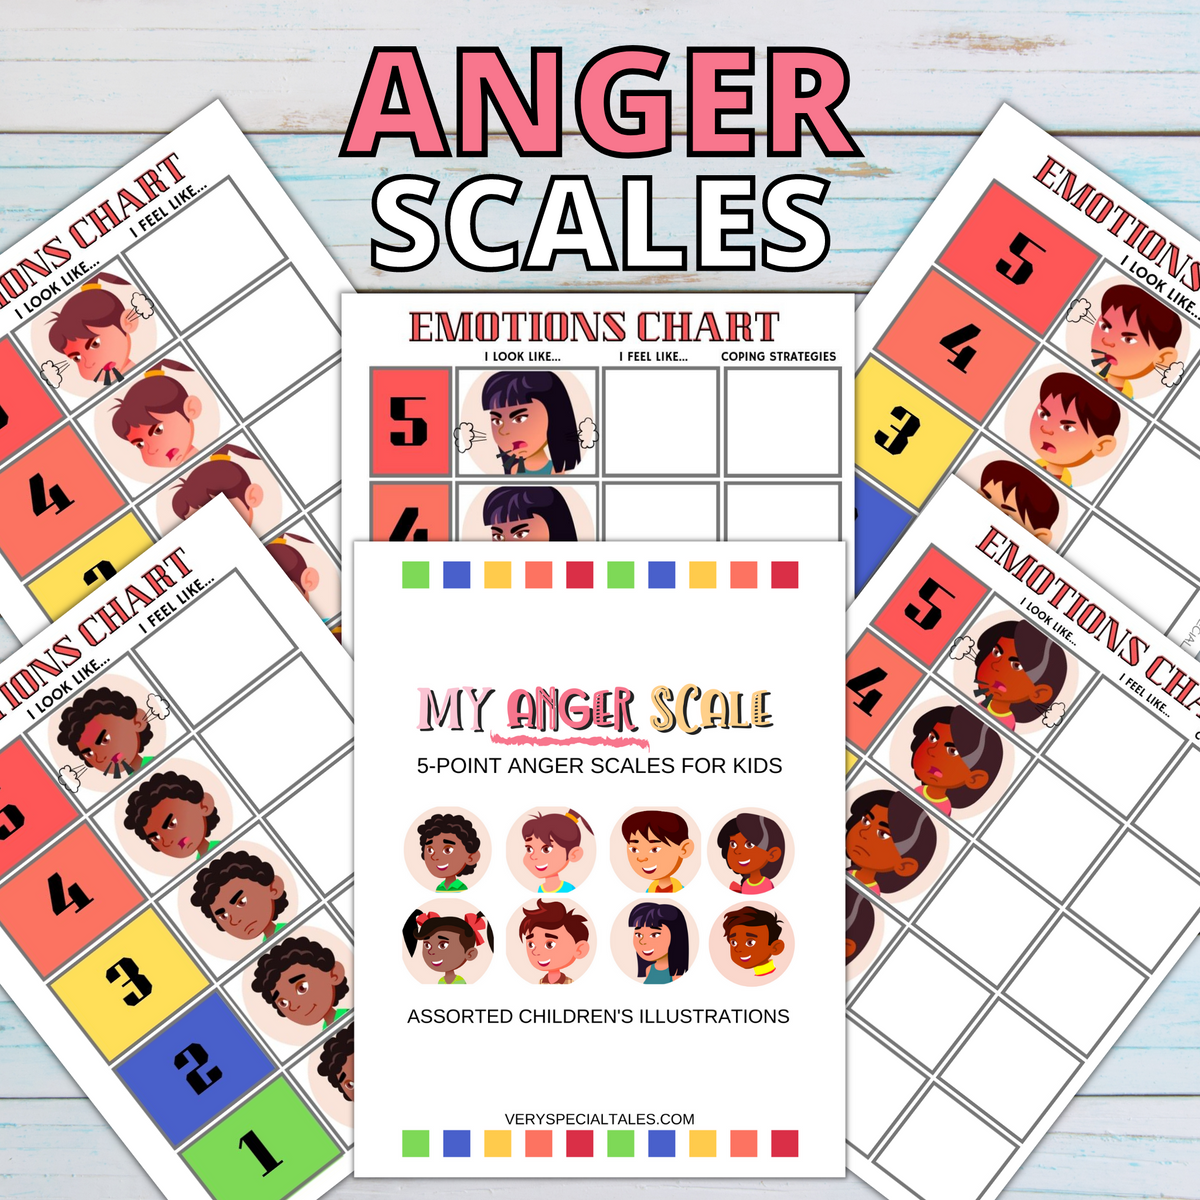 Various charts from the My Anger Scale product depicting different ranges of each emotion from 1 to 5, with illustrations.